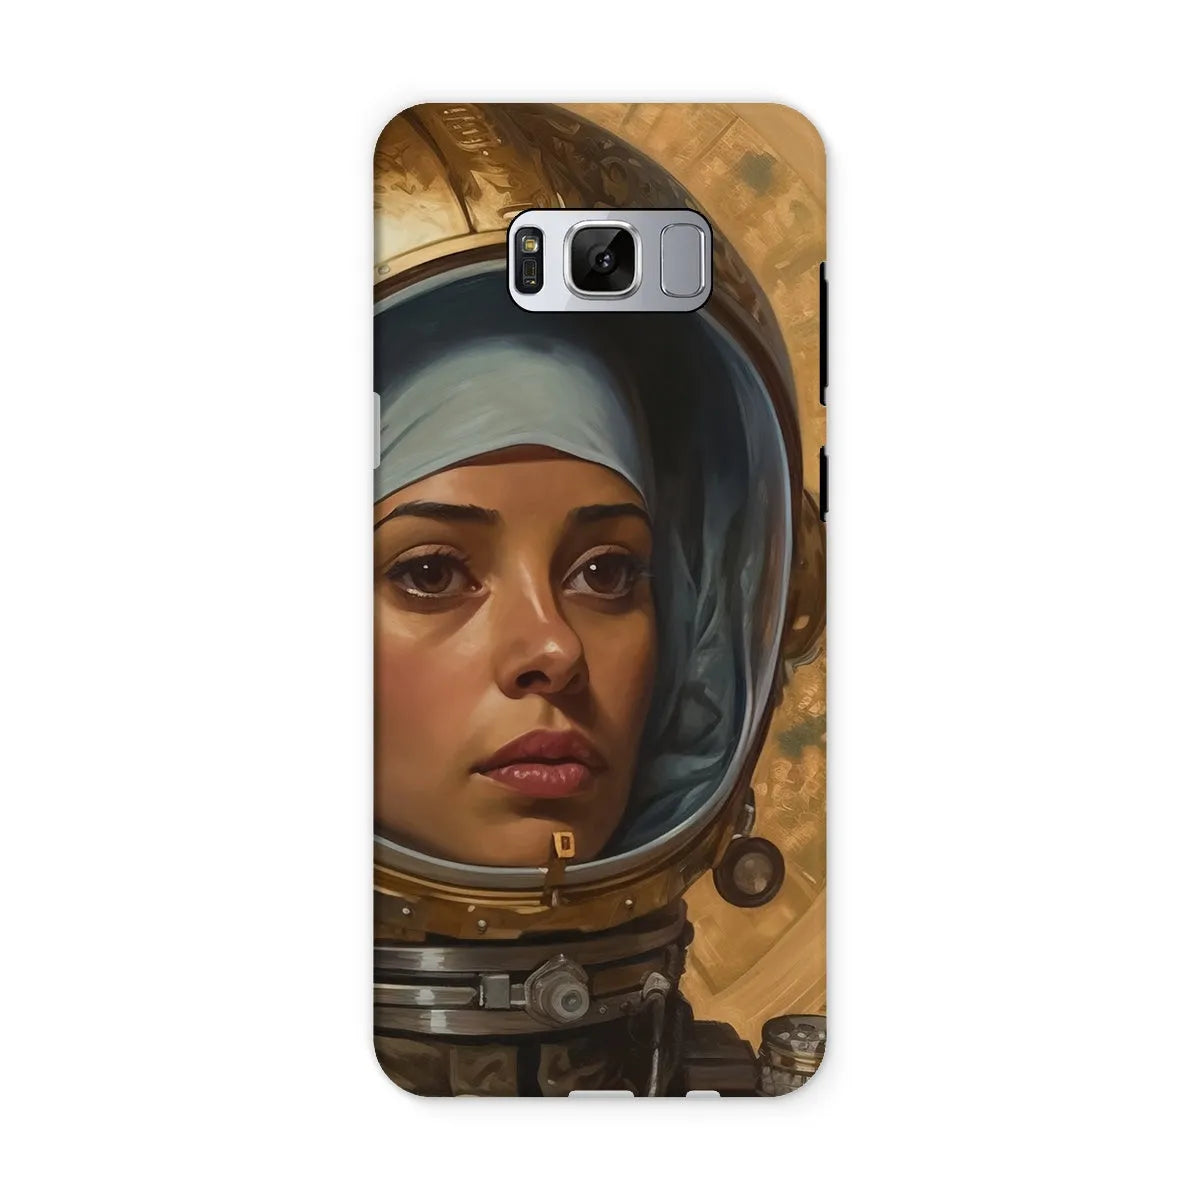 Amira The Lesbian Astronaut - Sapphic Aesthetic Phone Case - Samsung Galaxy S8 / Matte - Mobile Phone Cases - Aesthetic